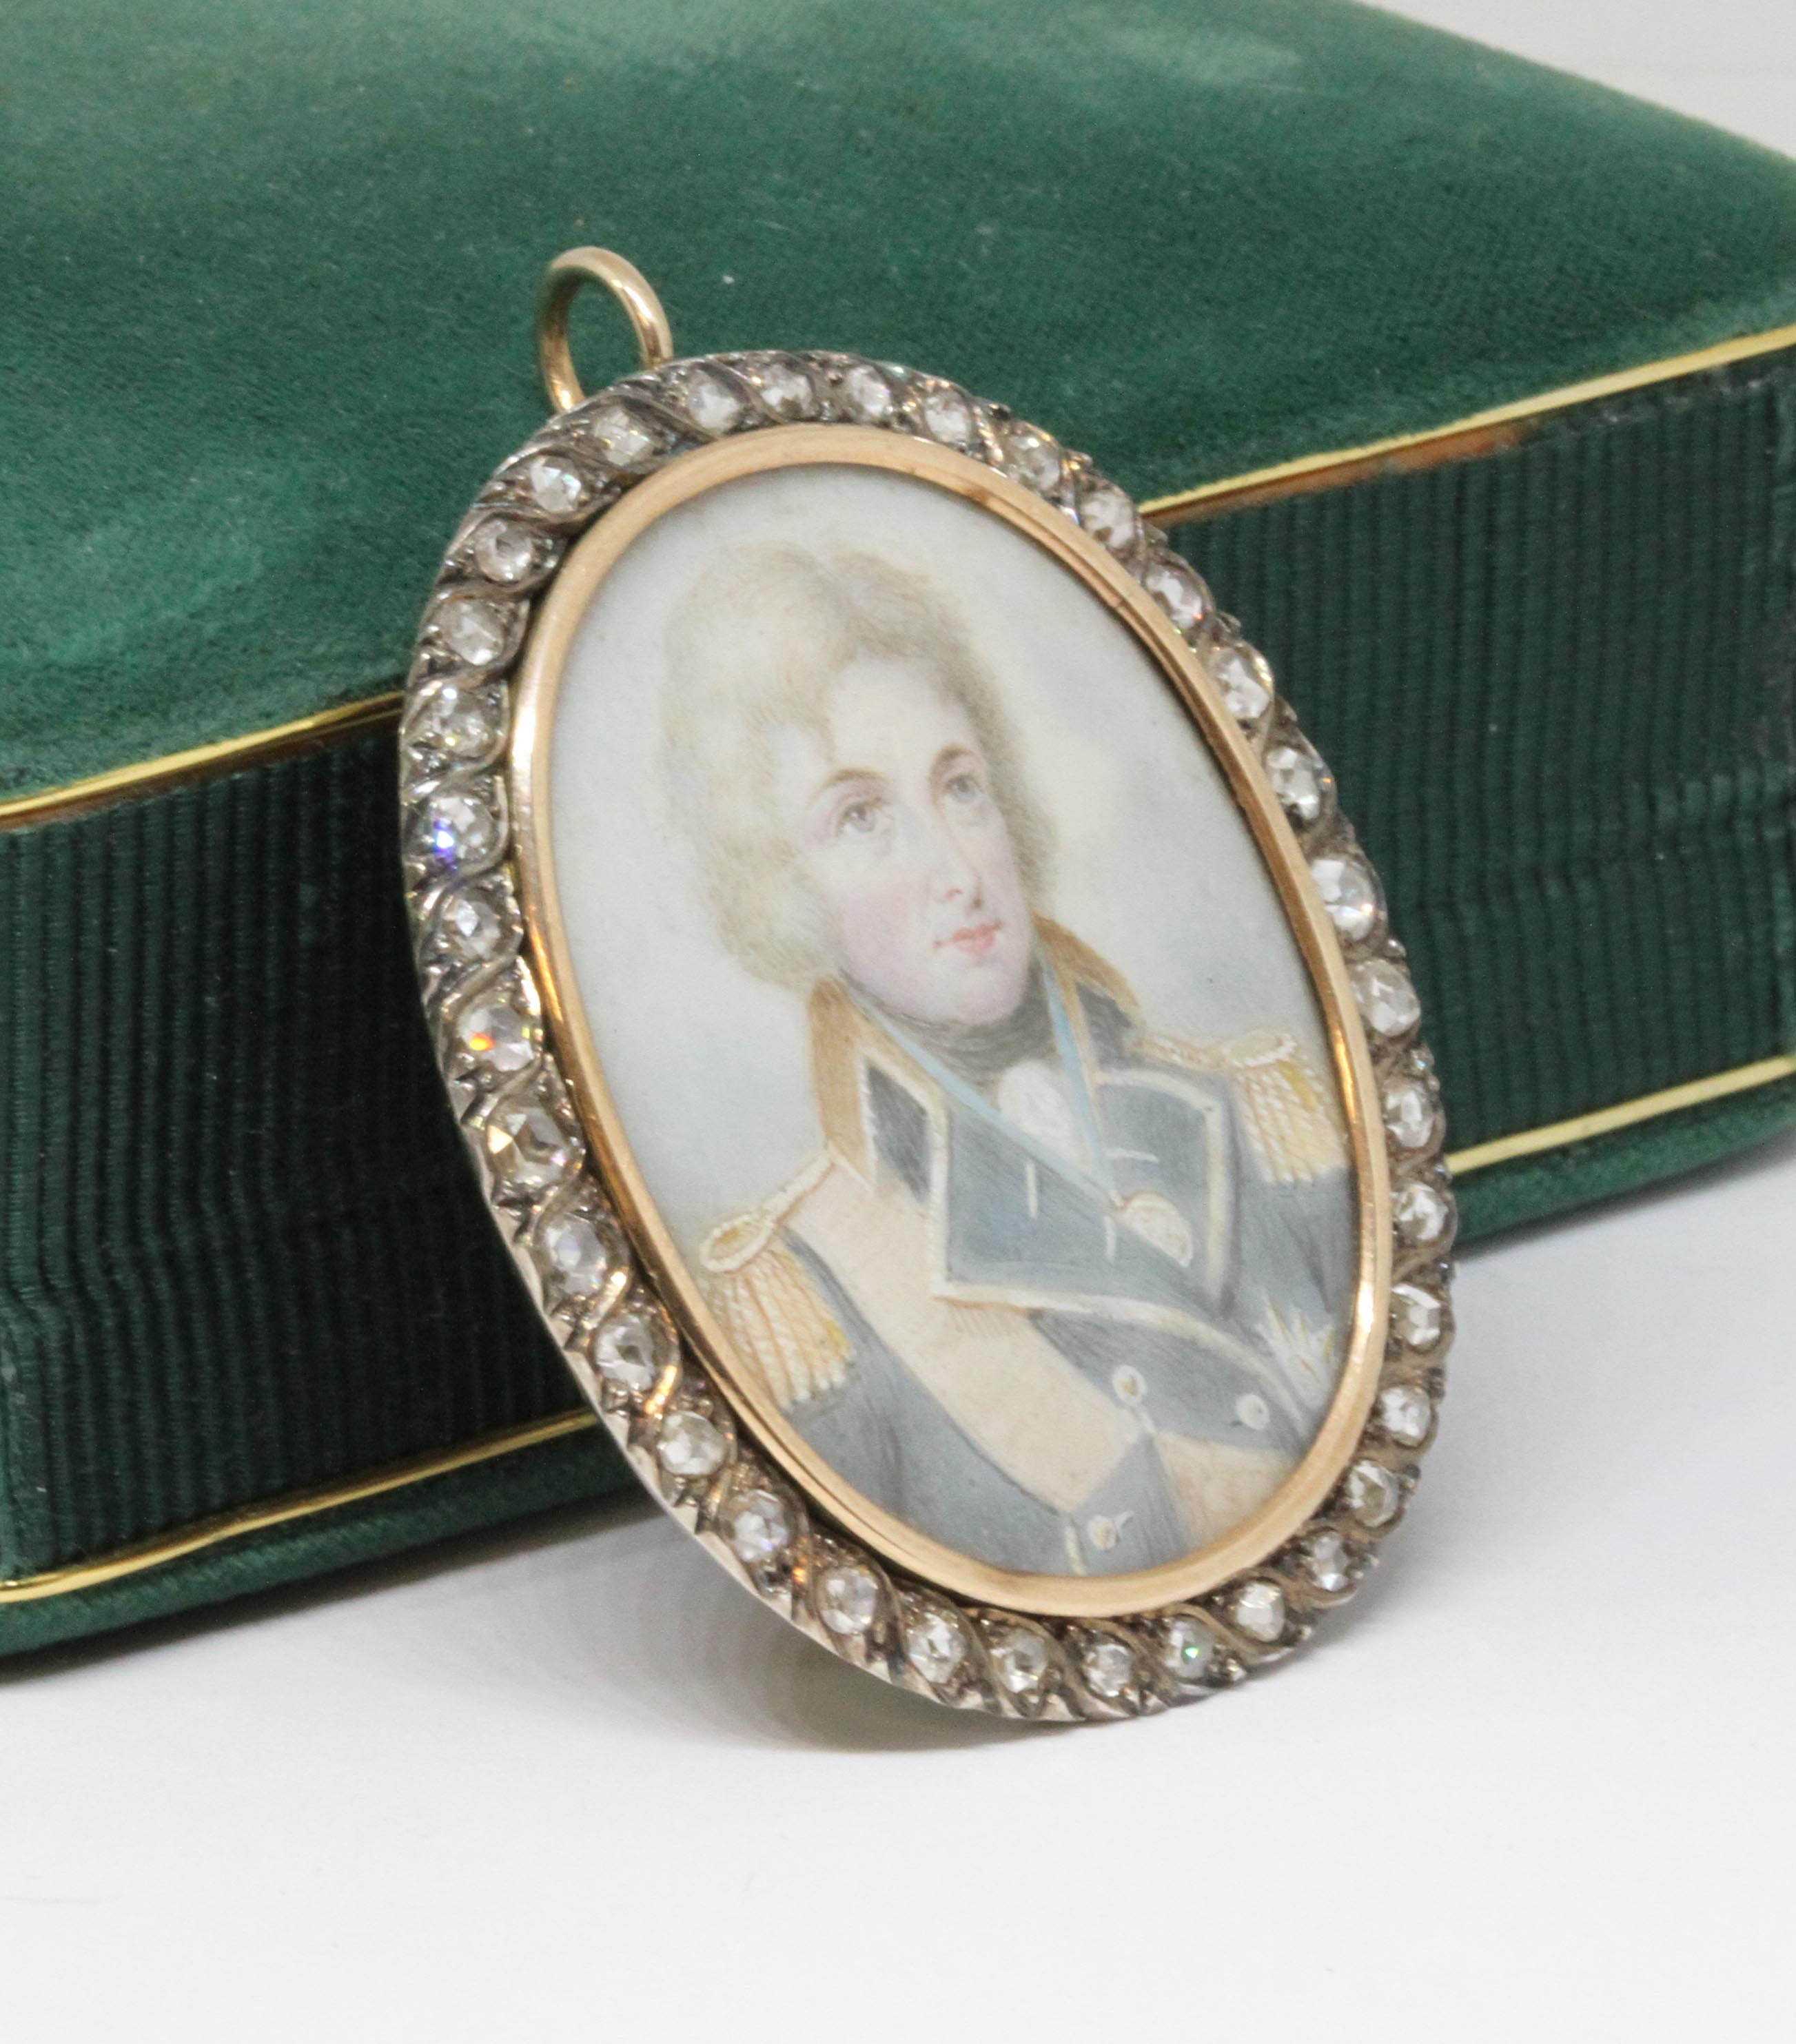 A late 18th century portrait miniature on ivory, circa 1790, depicting Lord Nelson, surrounded by - Image 2 of 7